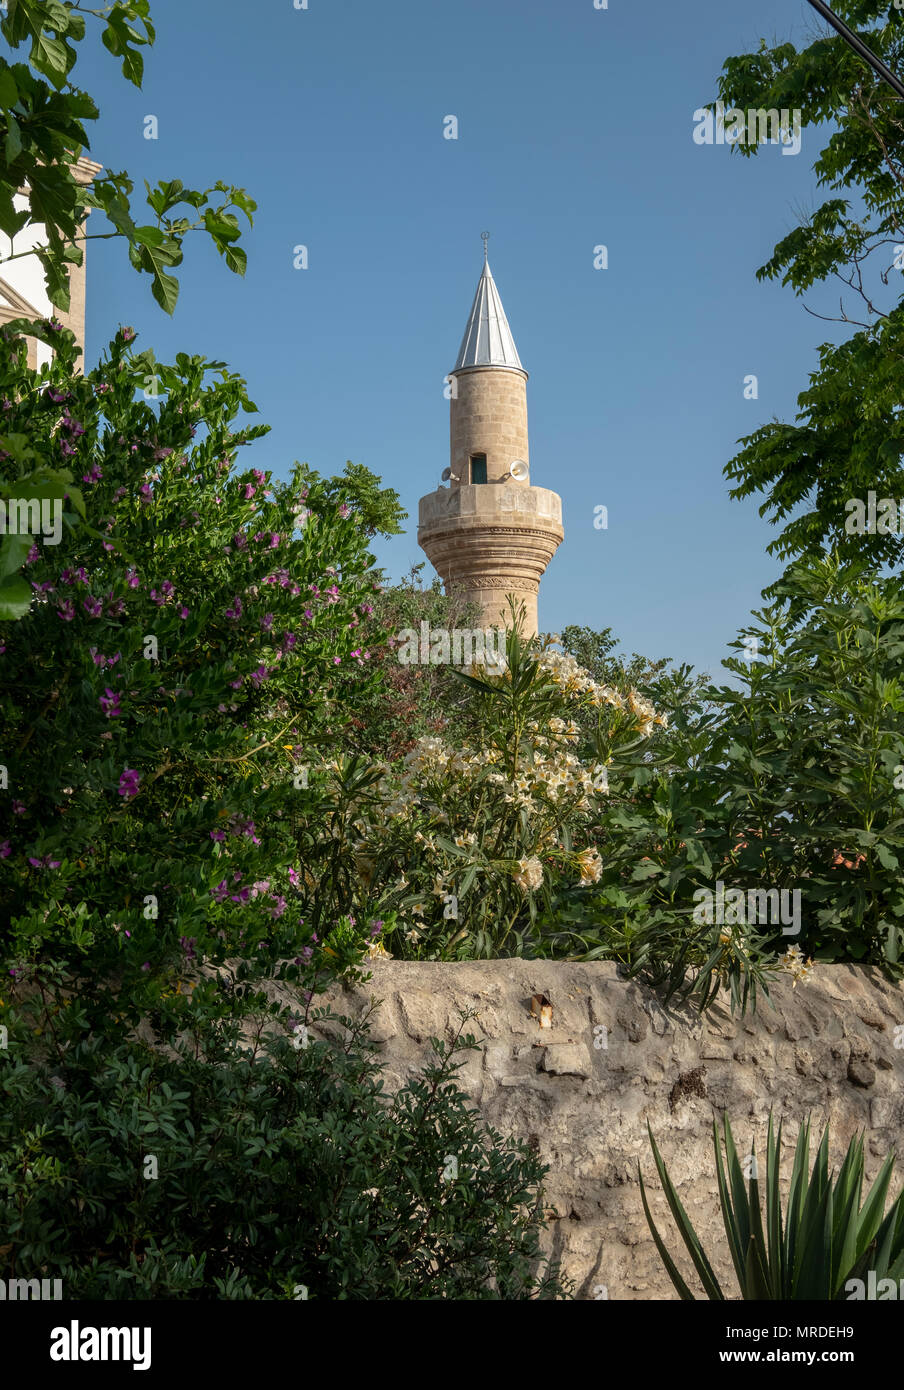 The minaret of Ağa Cafer Pasha Mosque in Kyrenia harbour, Northern Cyprus Stock Photo